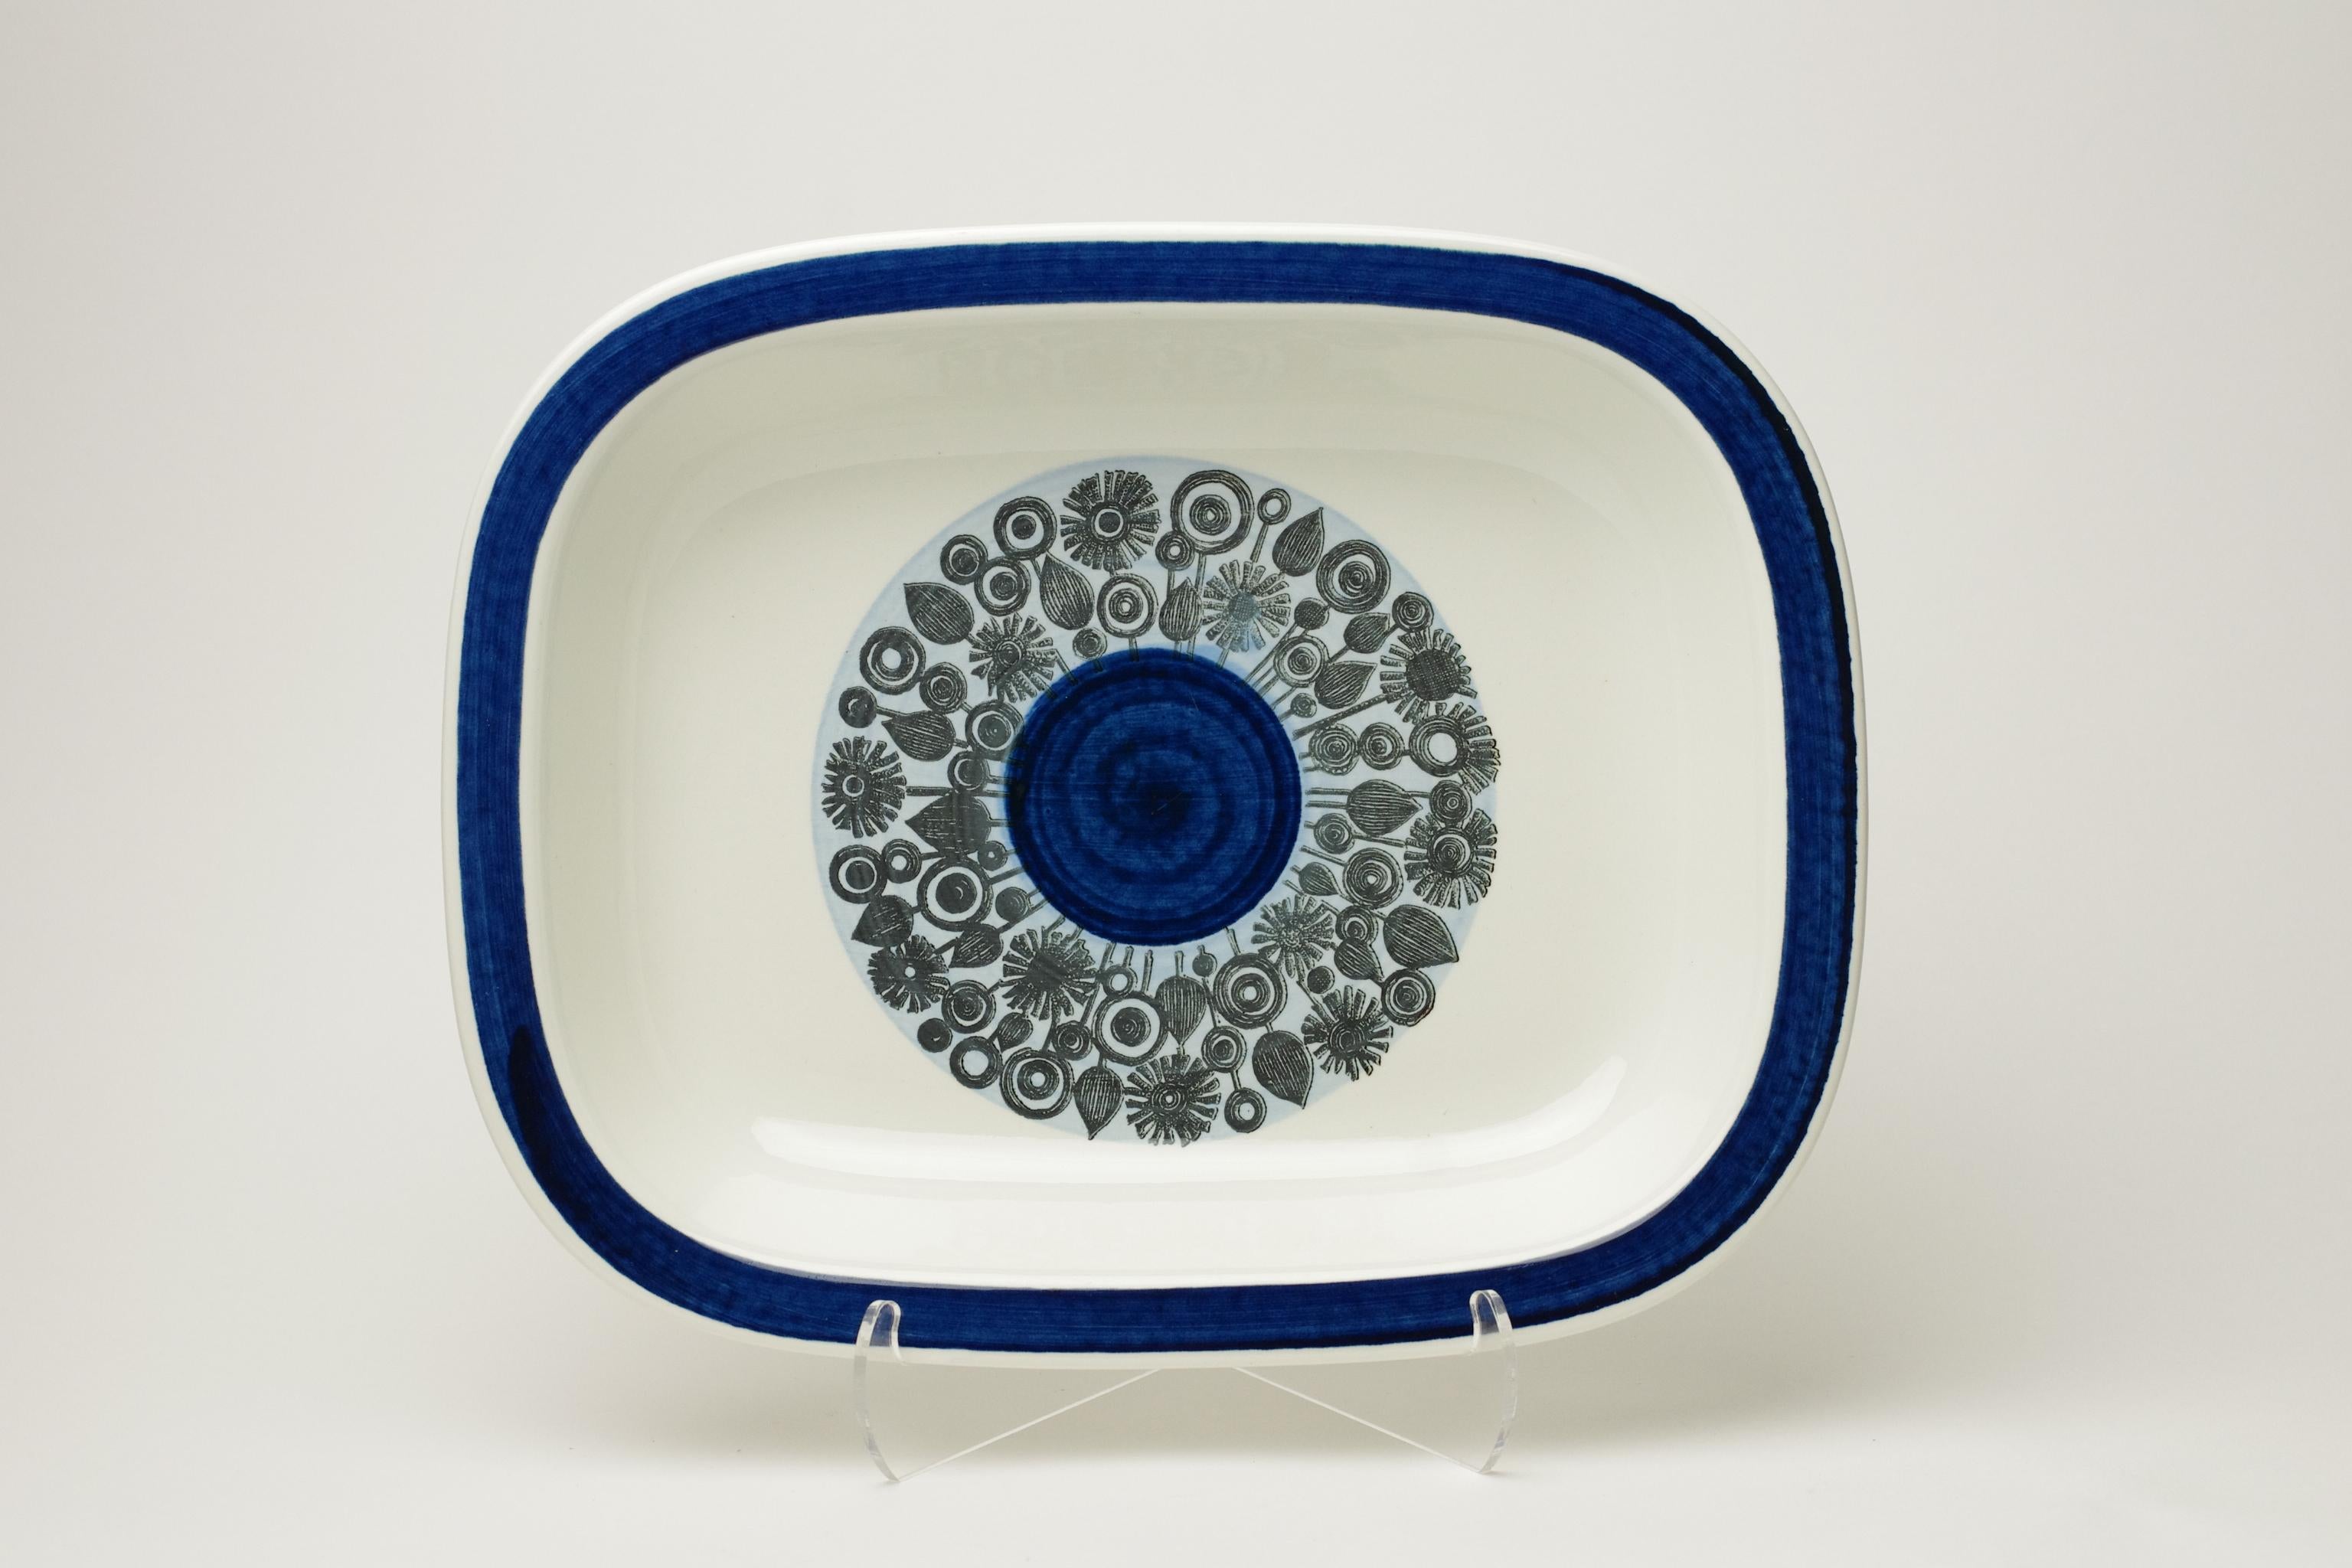 Product Description:
This serving platter has been designed by the Swedish firm Rörstrand. Christina Campbell was responsible for the design (form as well as pattern) of this item. Christina Campbell is probably most famous for her AMANDA-series at